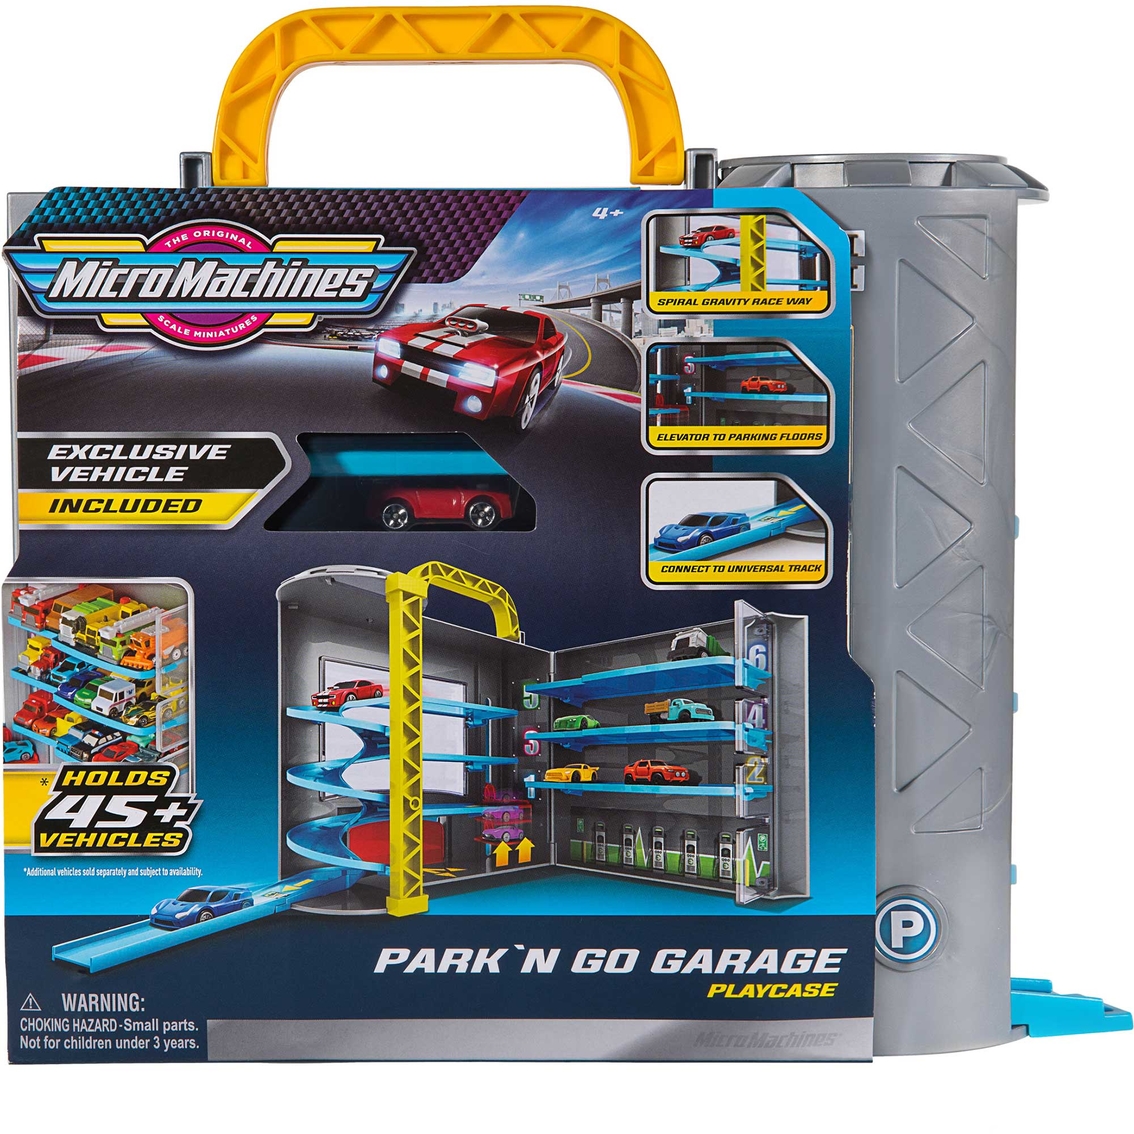 Micro Machines Park and Race Garage Playcase - Image 1 of 5